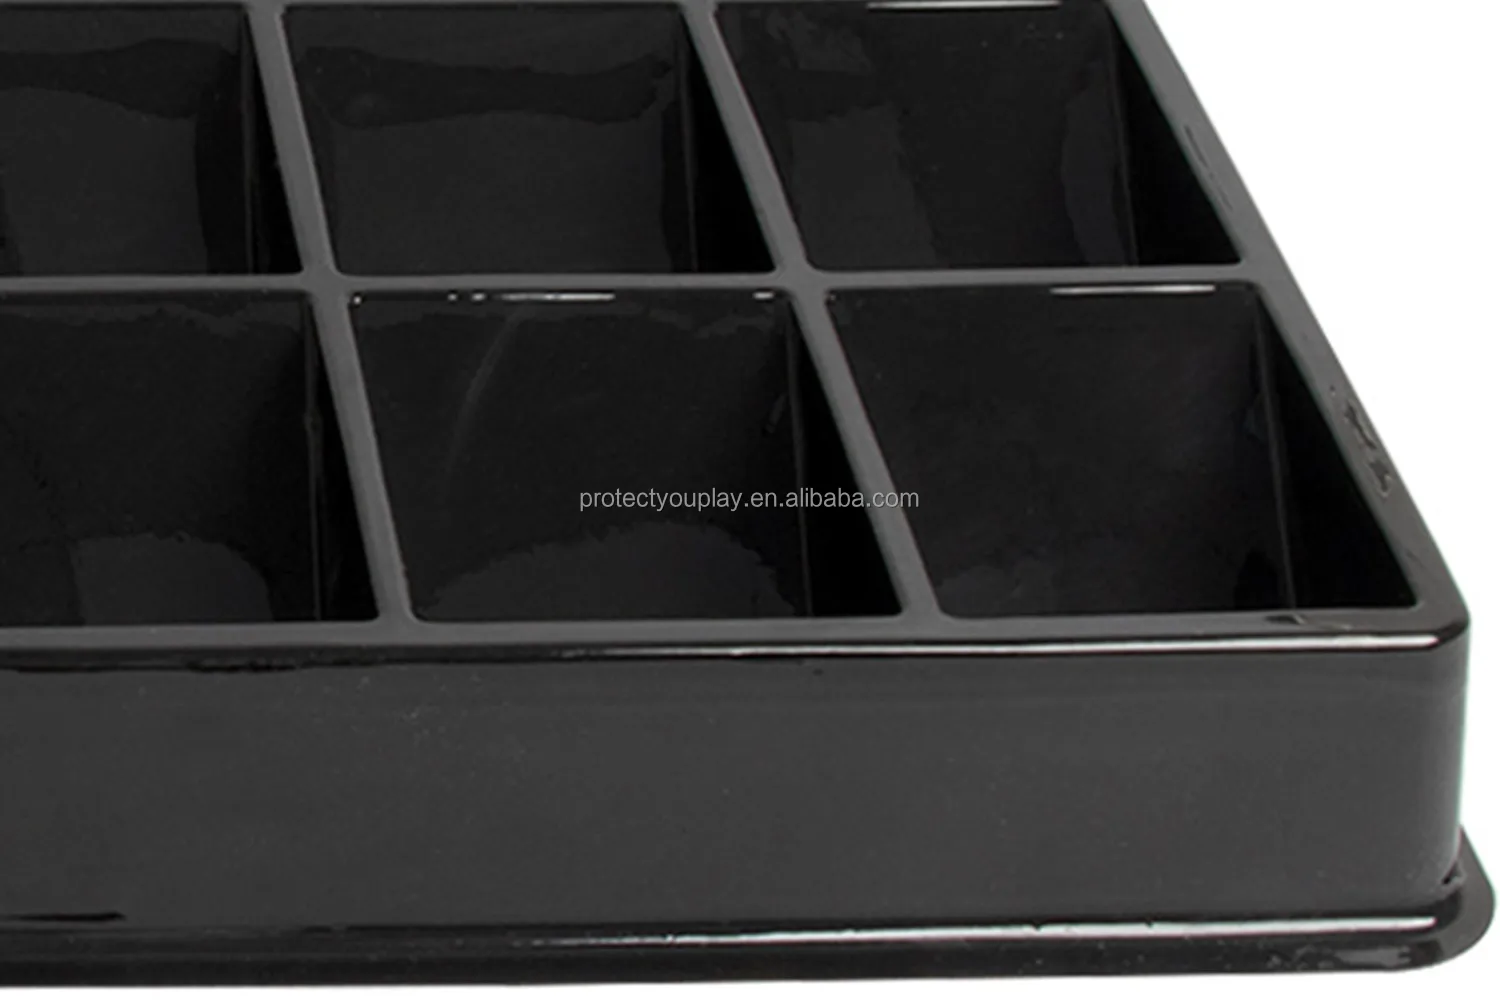 18 slot card sorting tray for